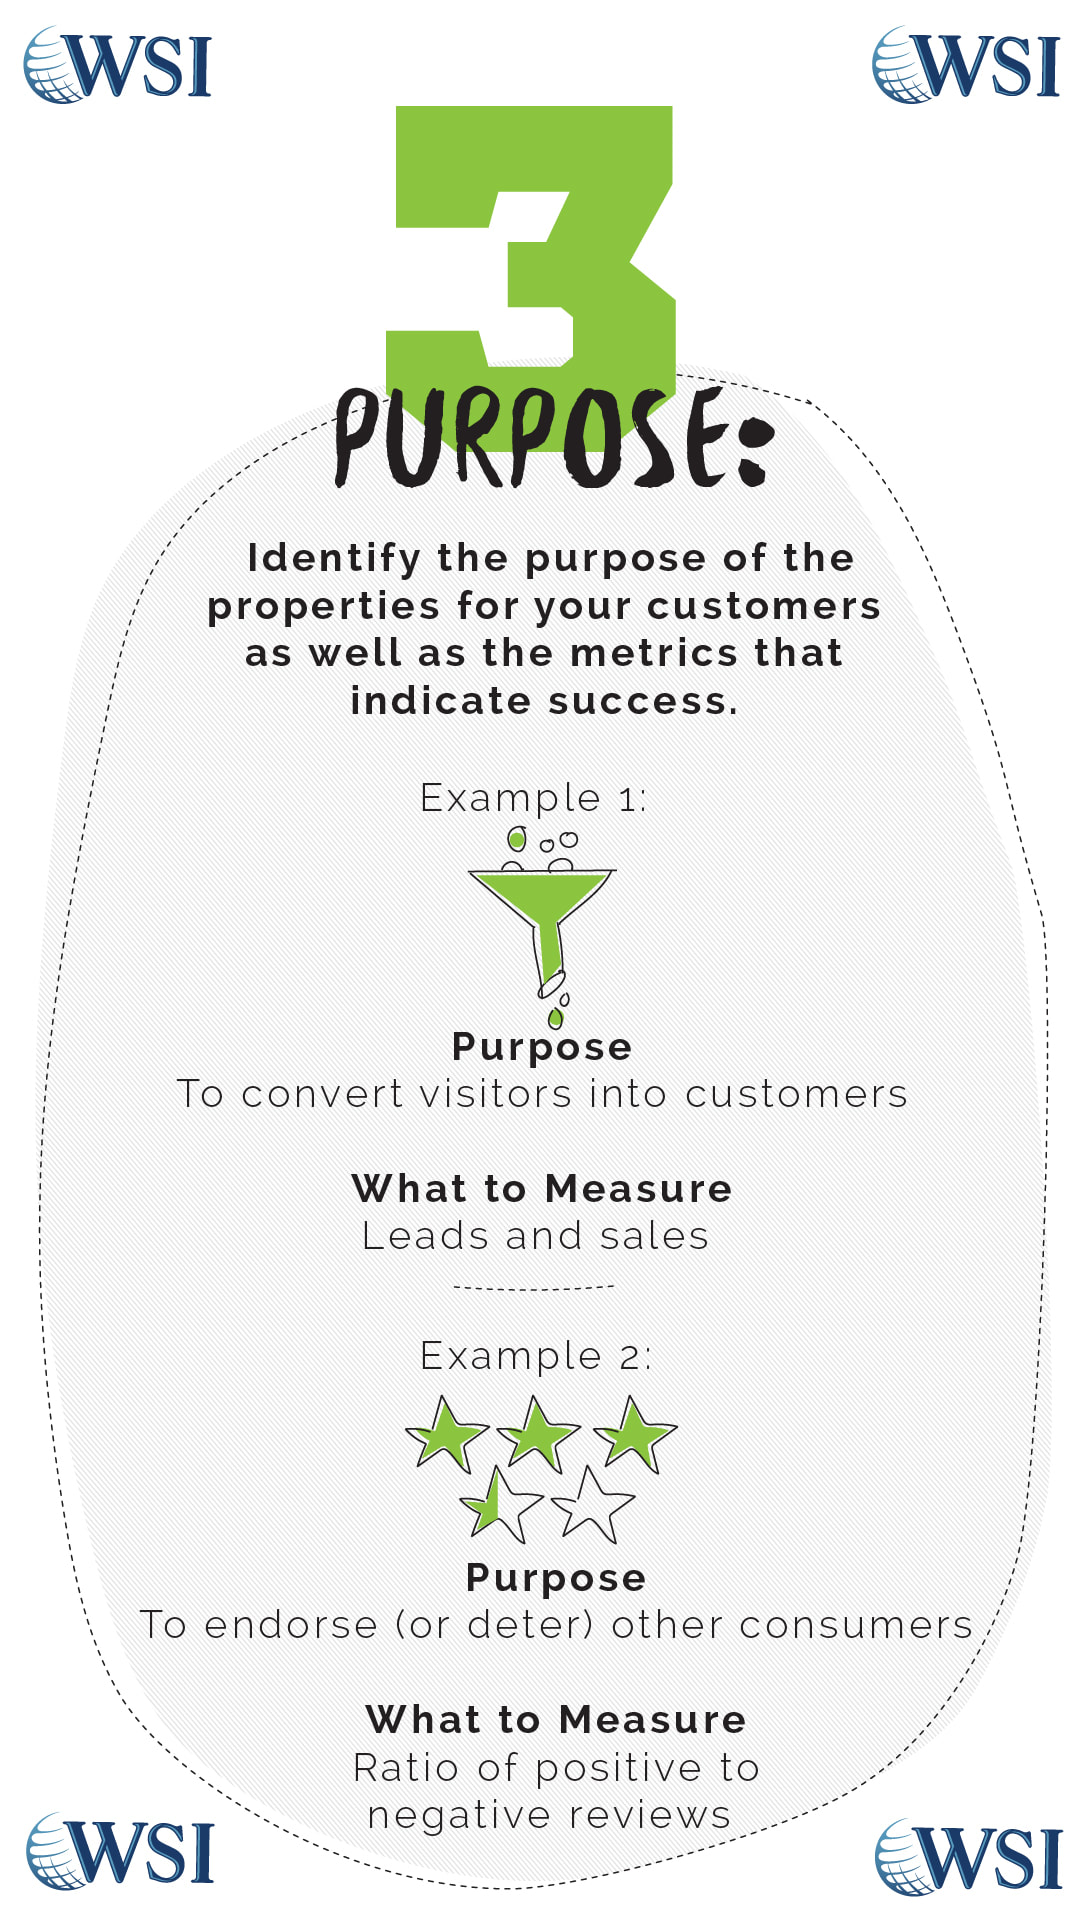 Purpose to convert visitors into customers